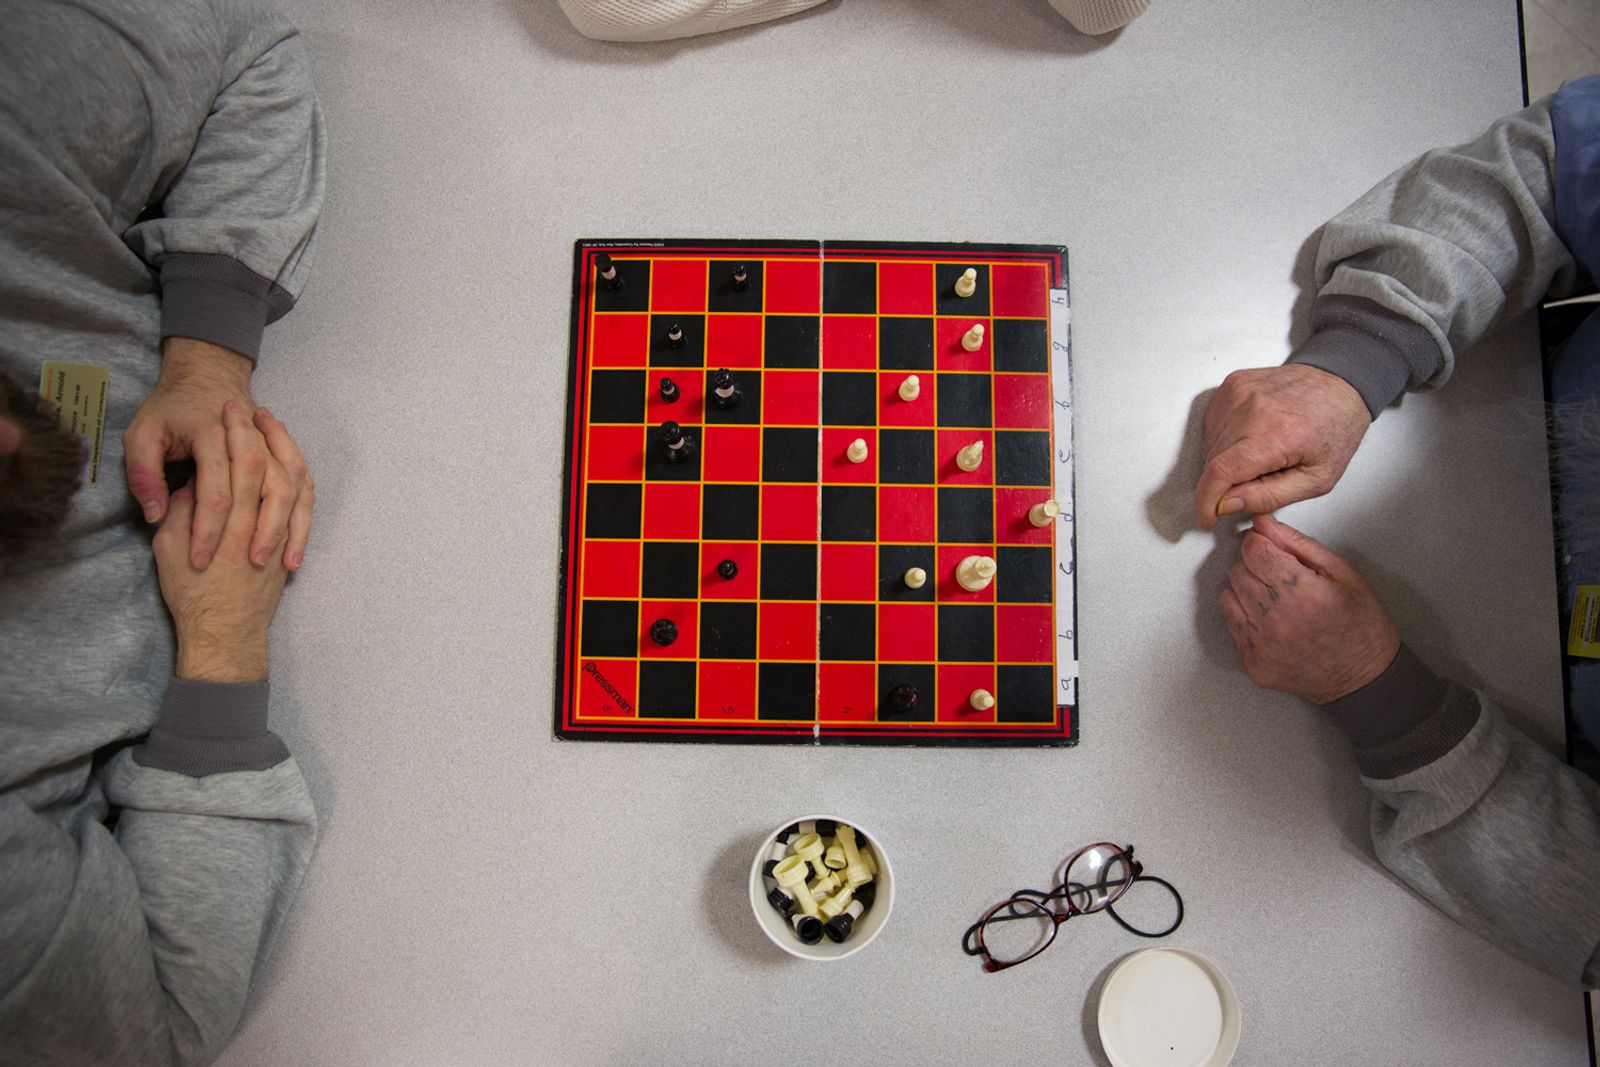 © Jessica Earnshaw - Image from the Aging In Prison  photography project